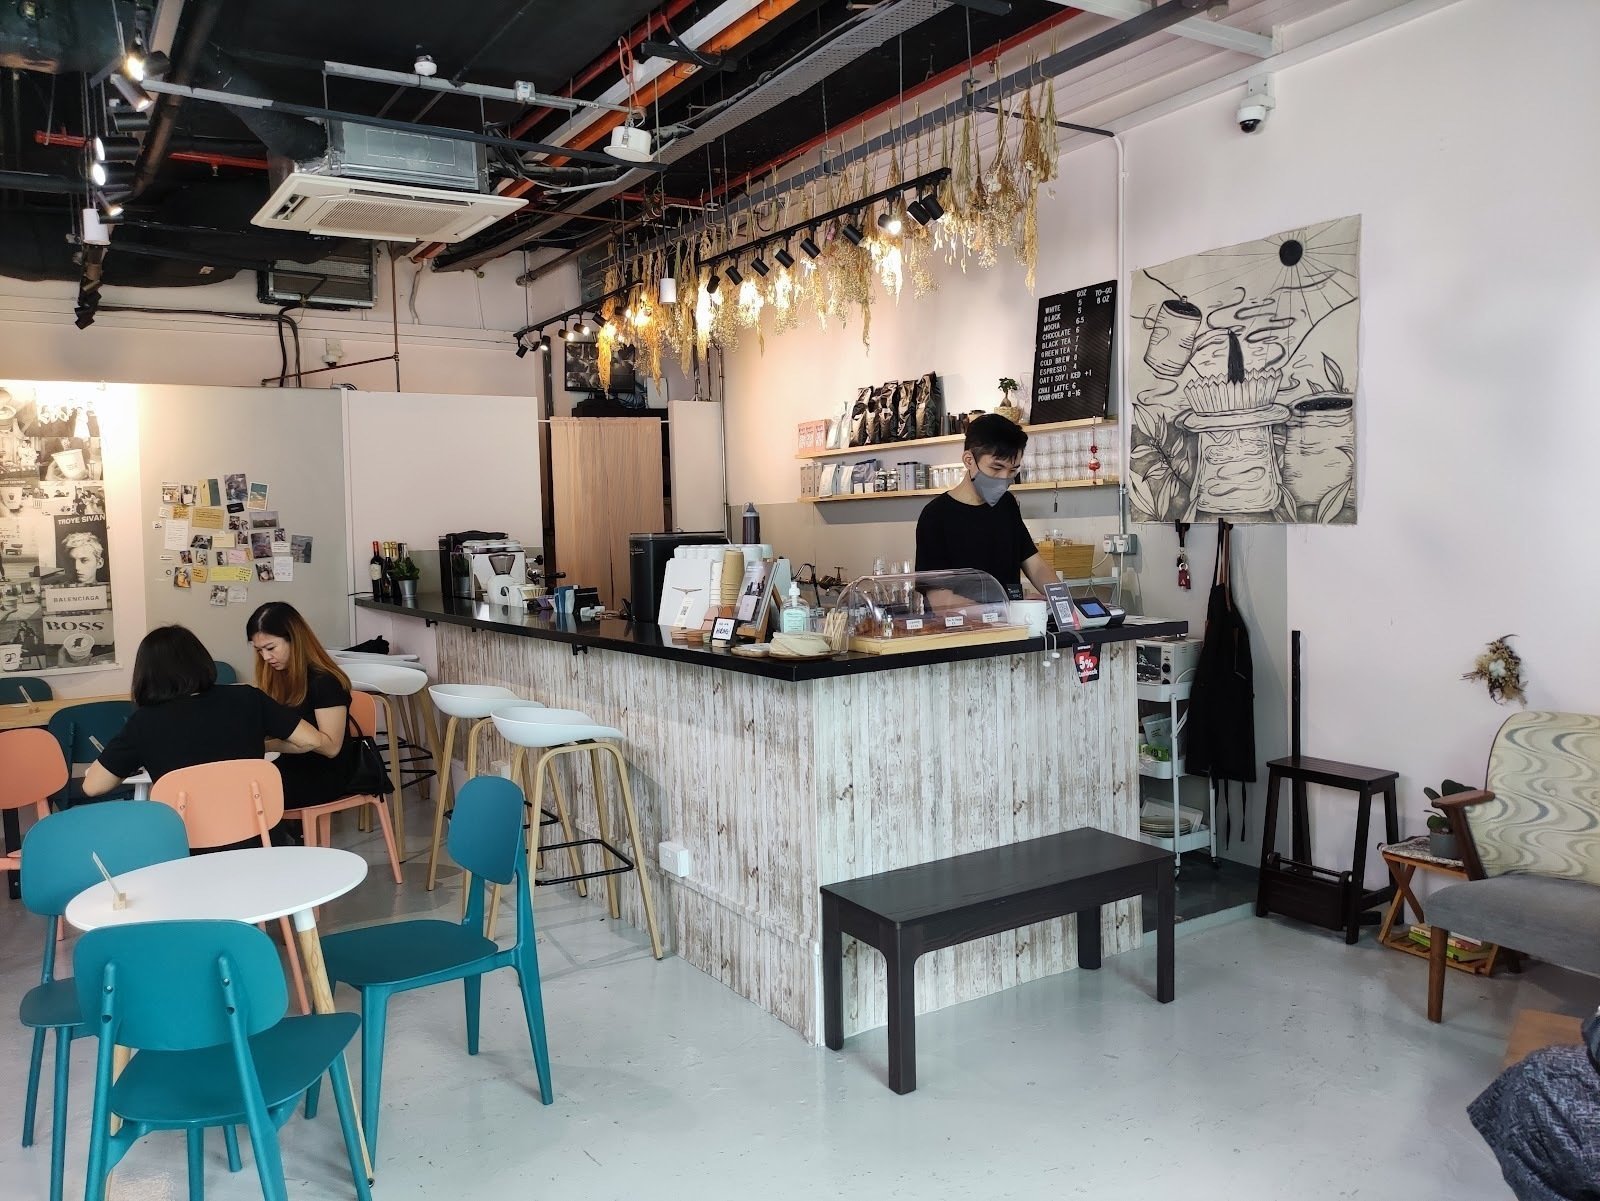 <span class="translation_missing" title="translation missing: en.meta.location_title, location_name: Butler Koffee, city: Singapore">Location Title</span>